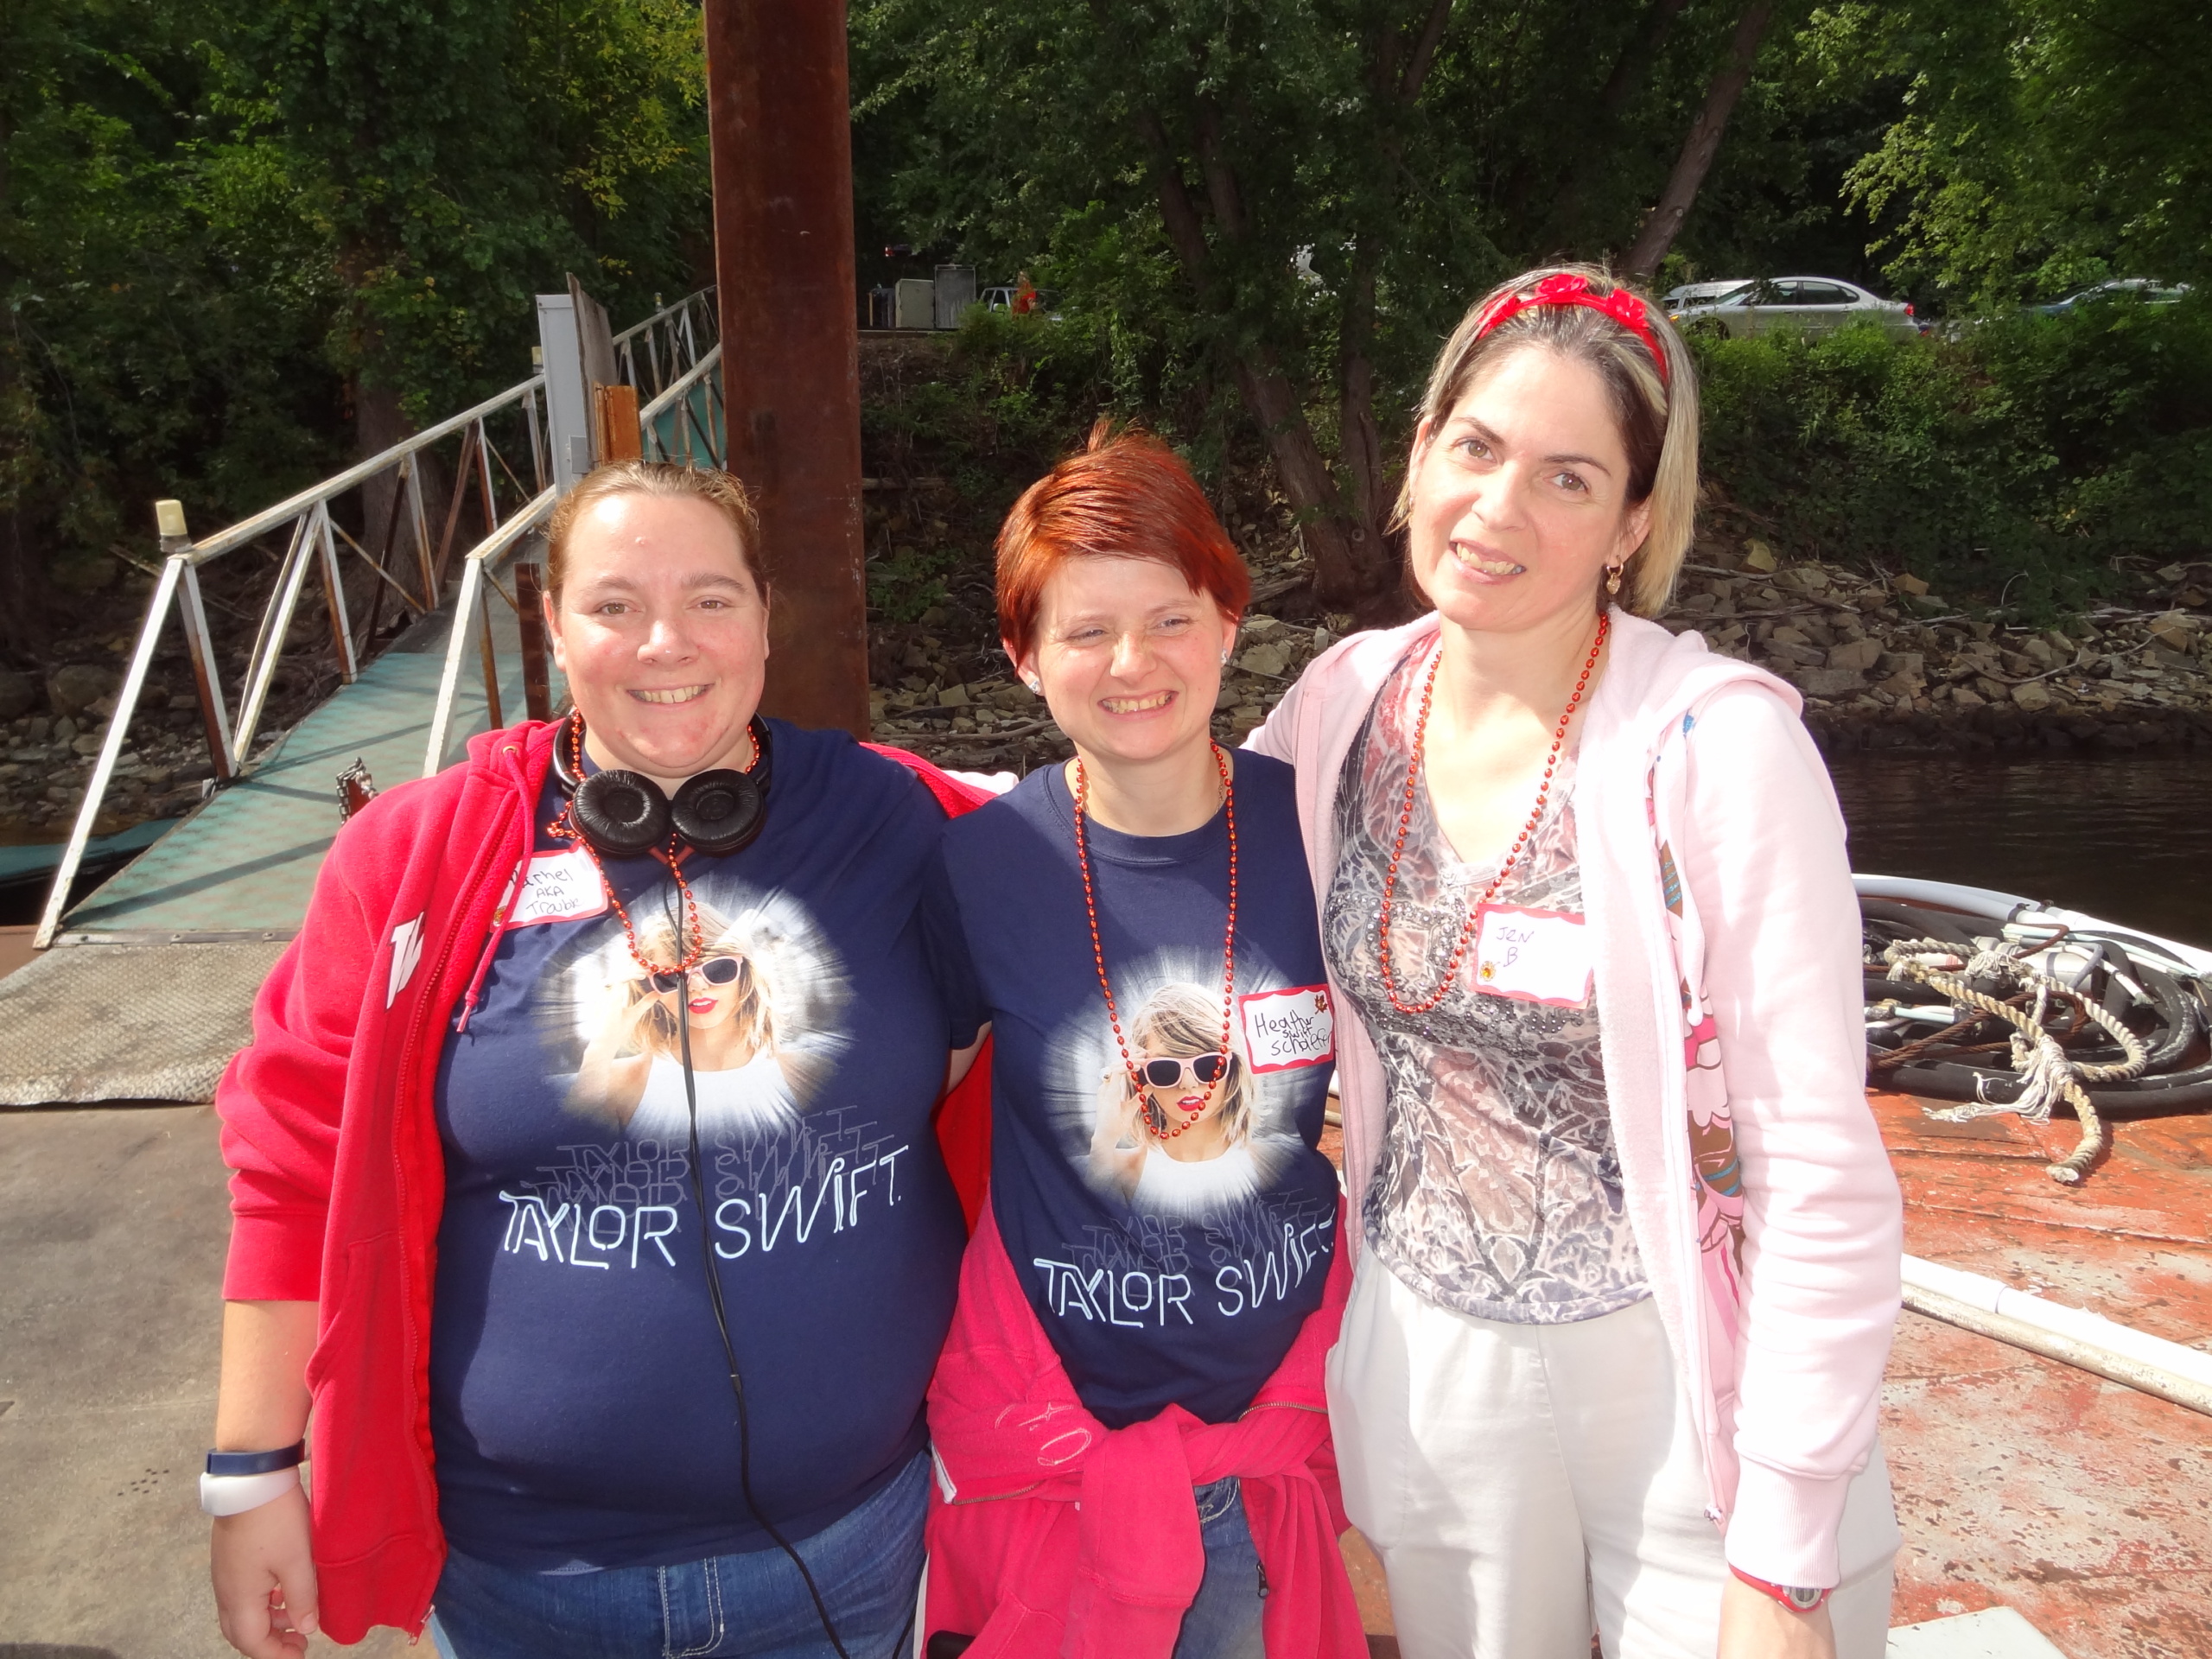 group of 3 individuals smiling for a photo in Taylor Swift shirts